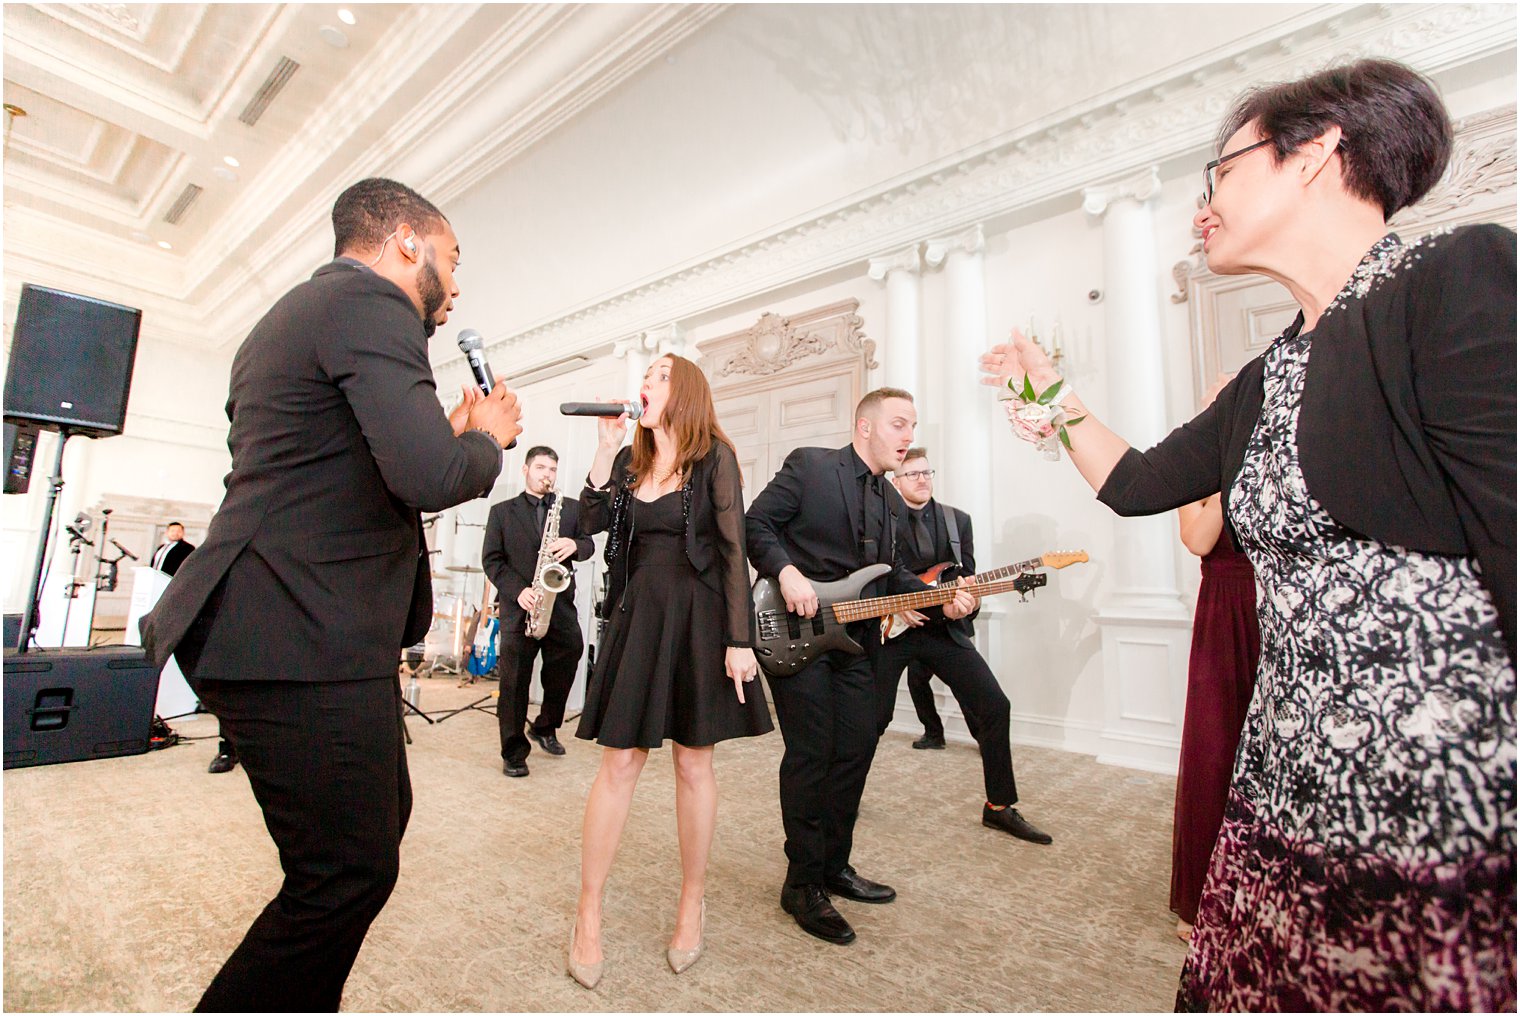 City Scape jams out during wedding day 